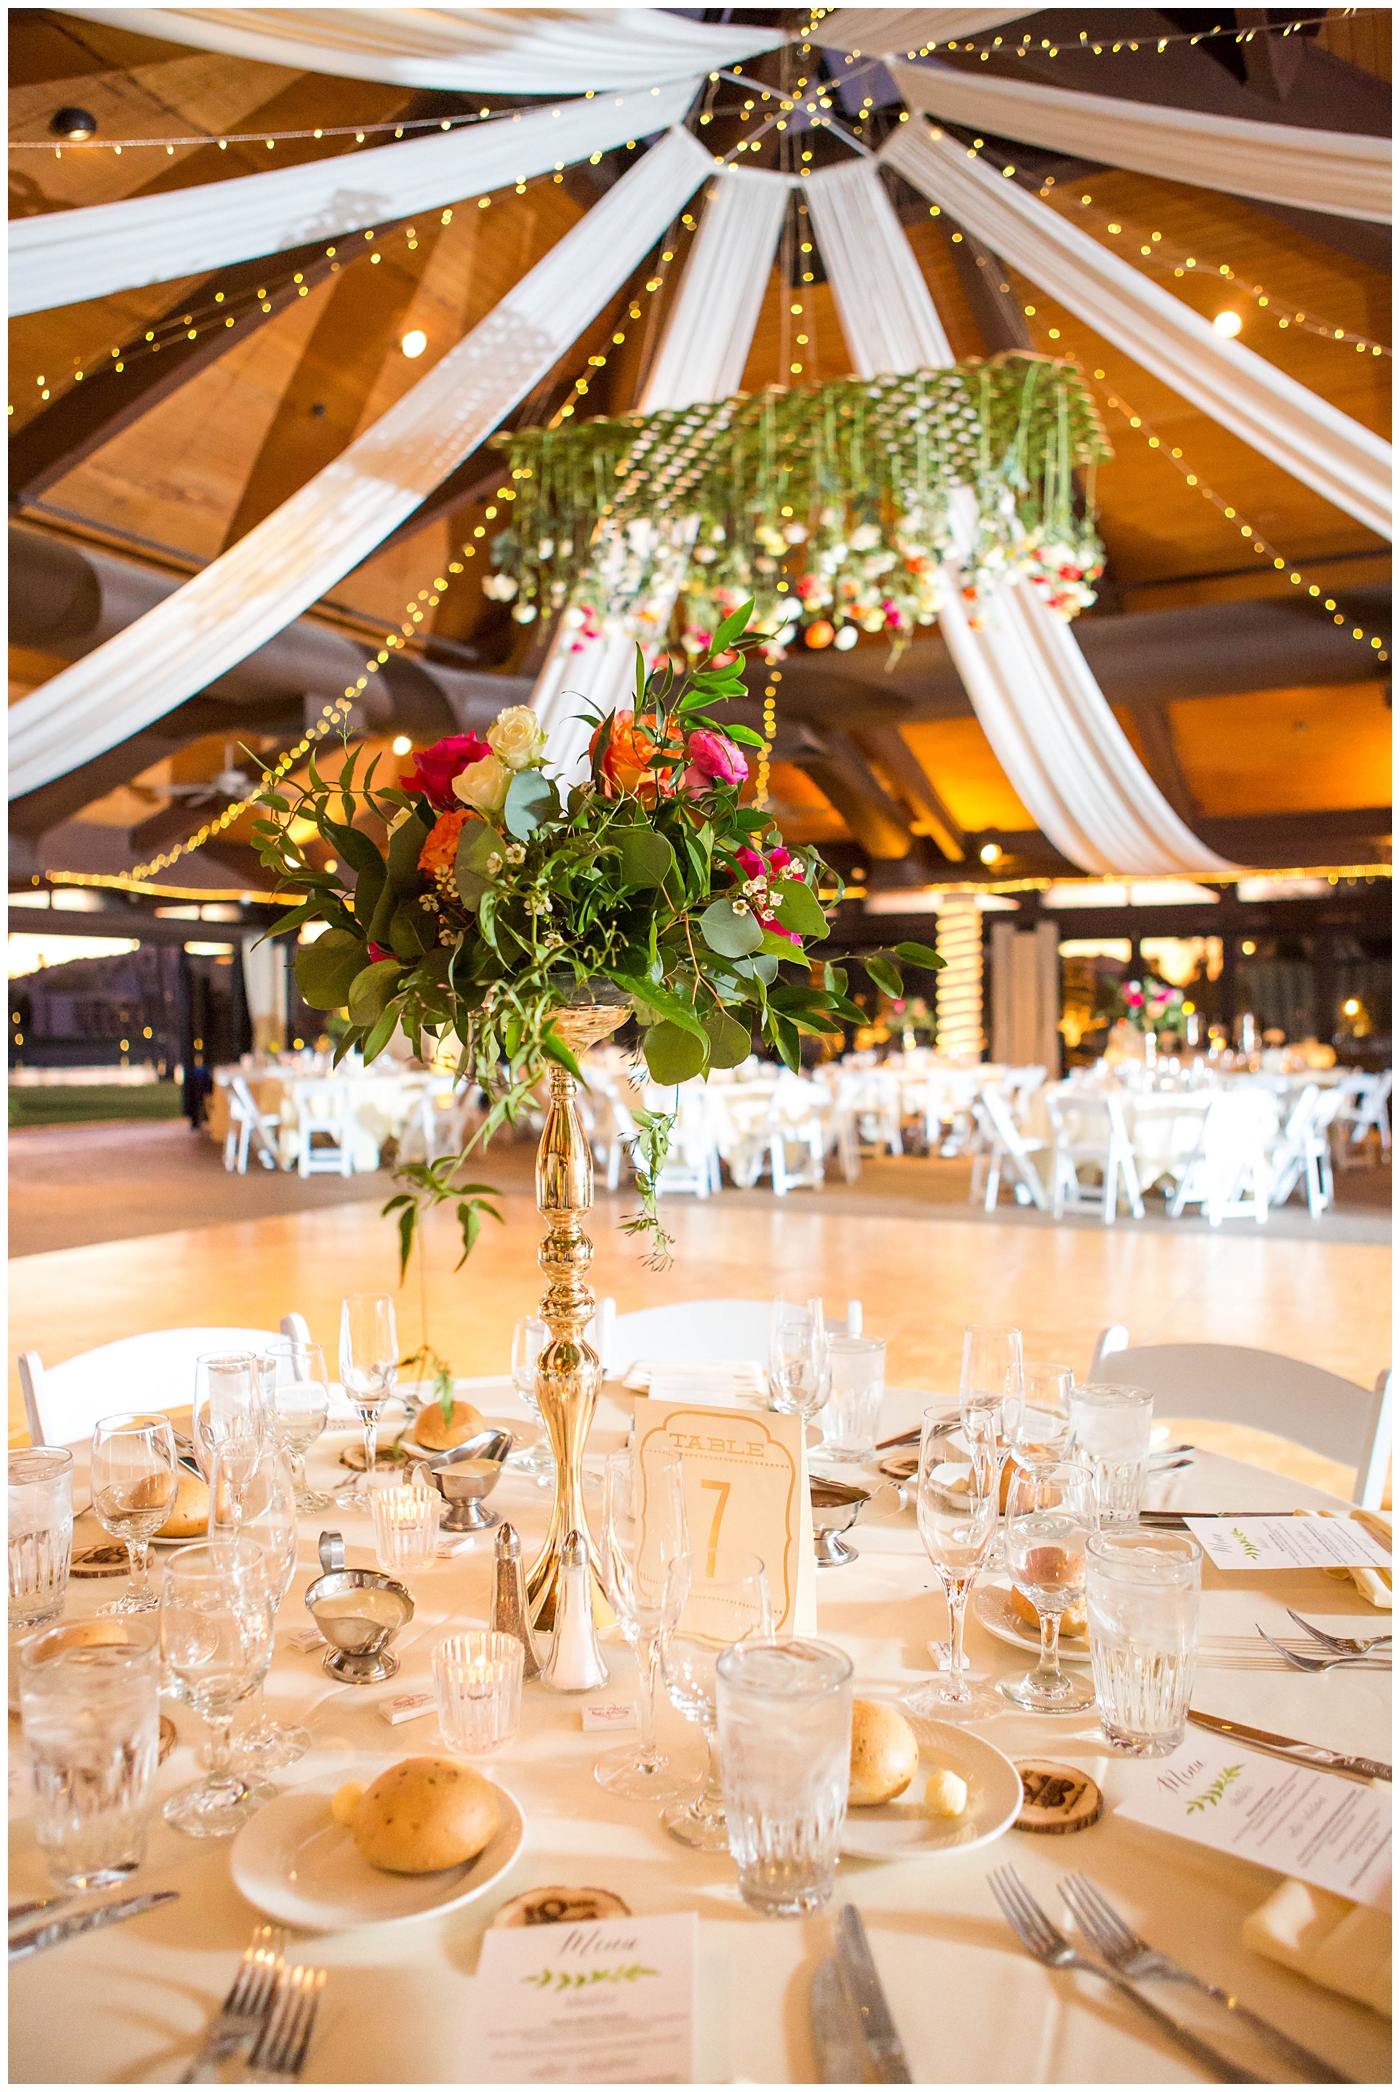 wedding reception details with white tables and chairs with gold stands with white, bright pink, orange, yellow and green flowers hanging from ceiling